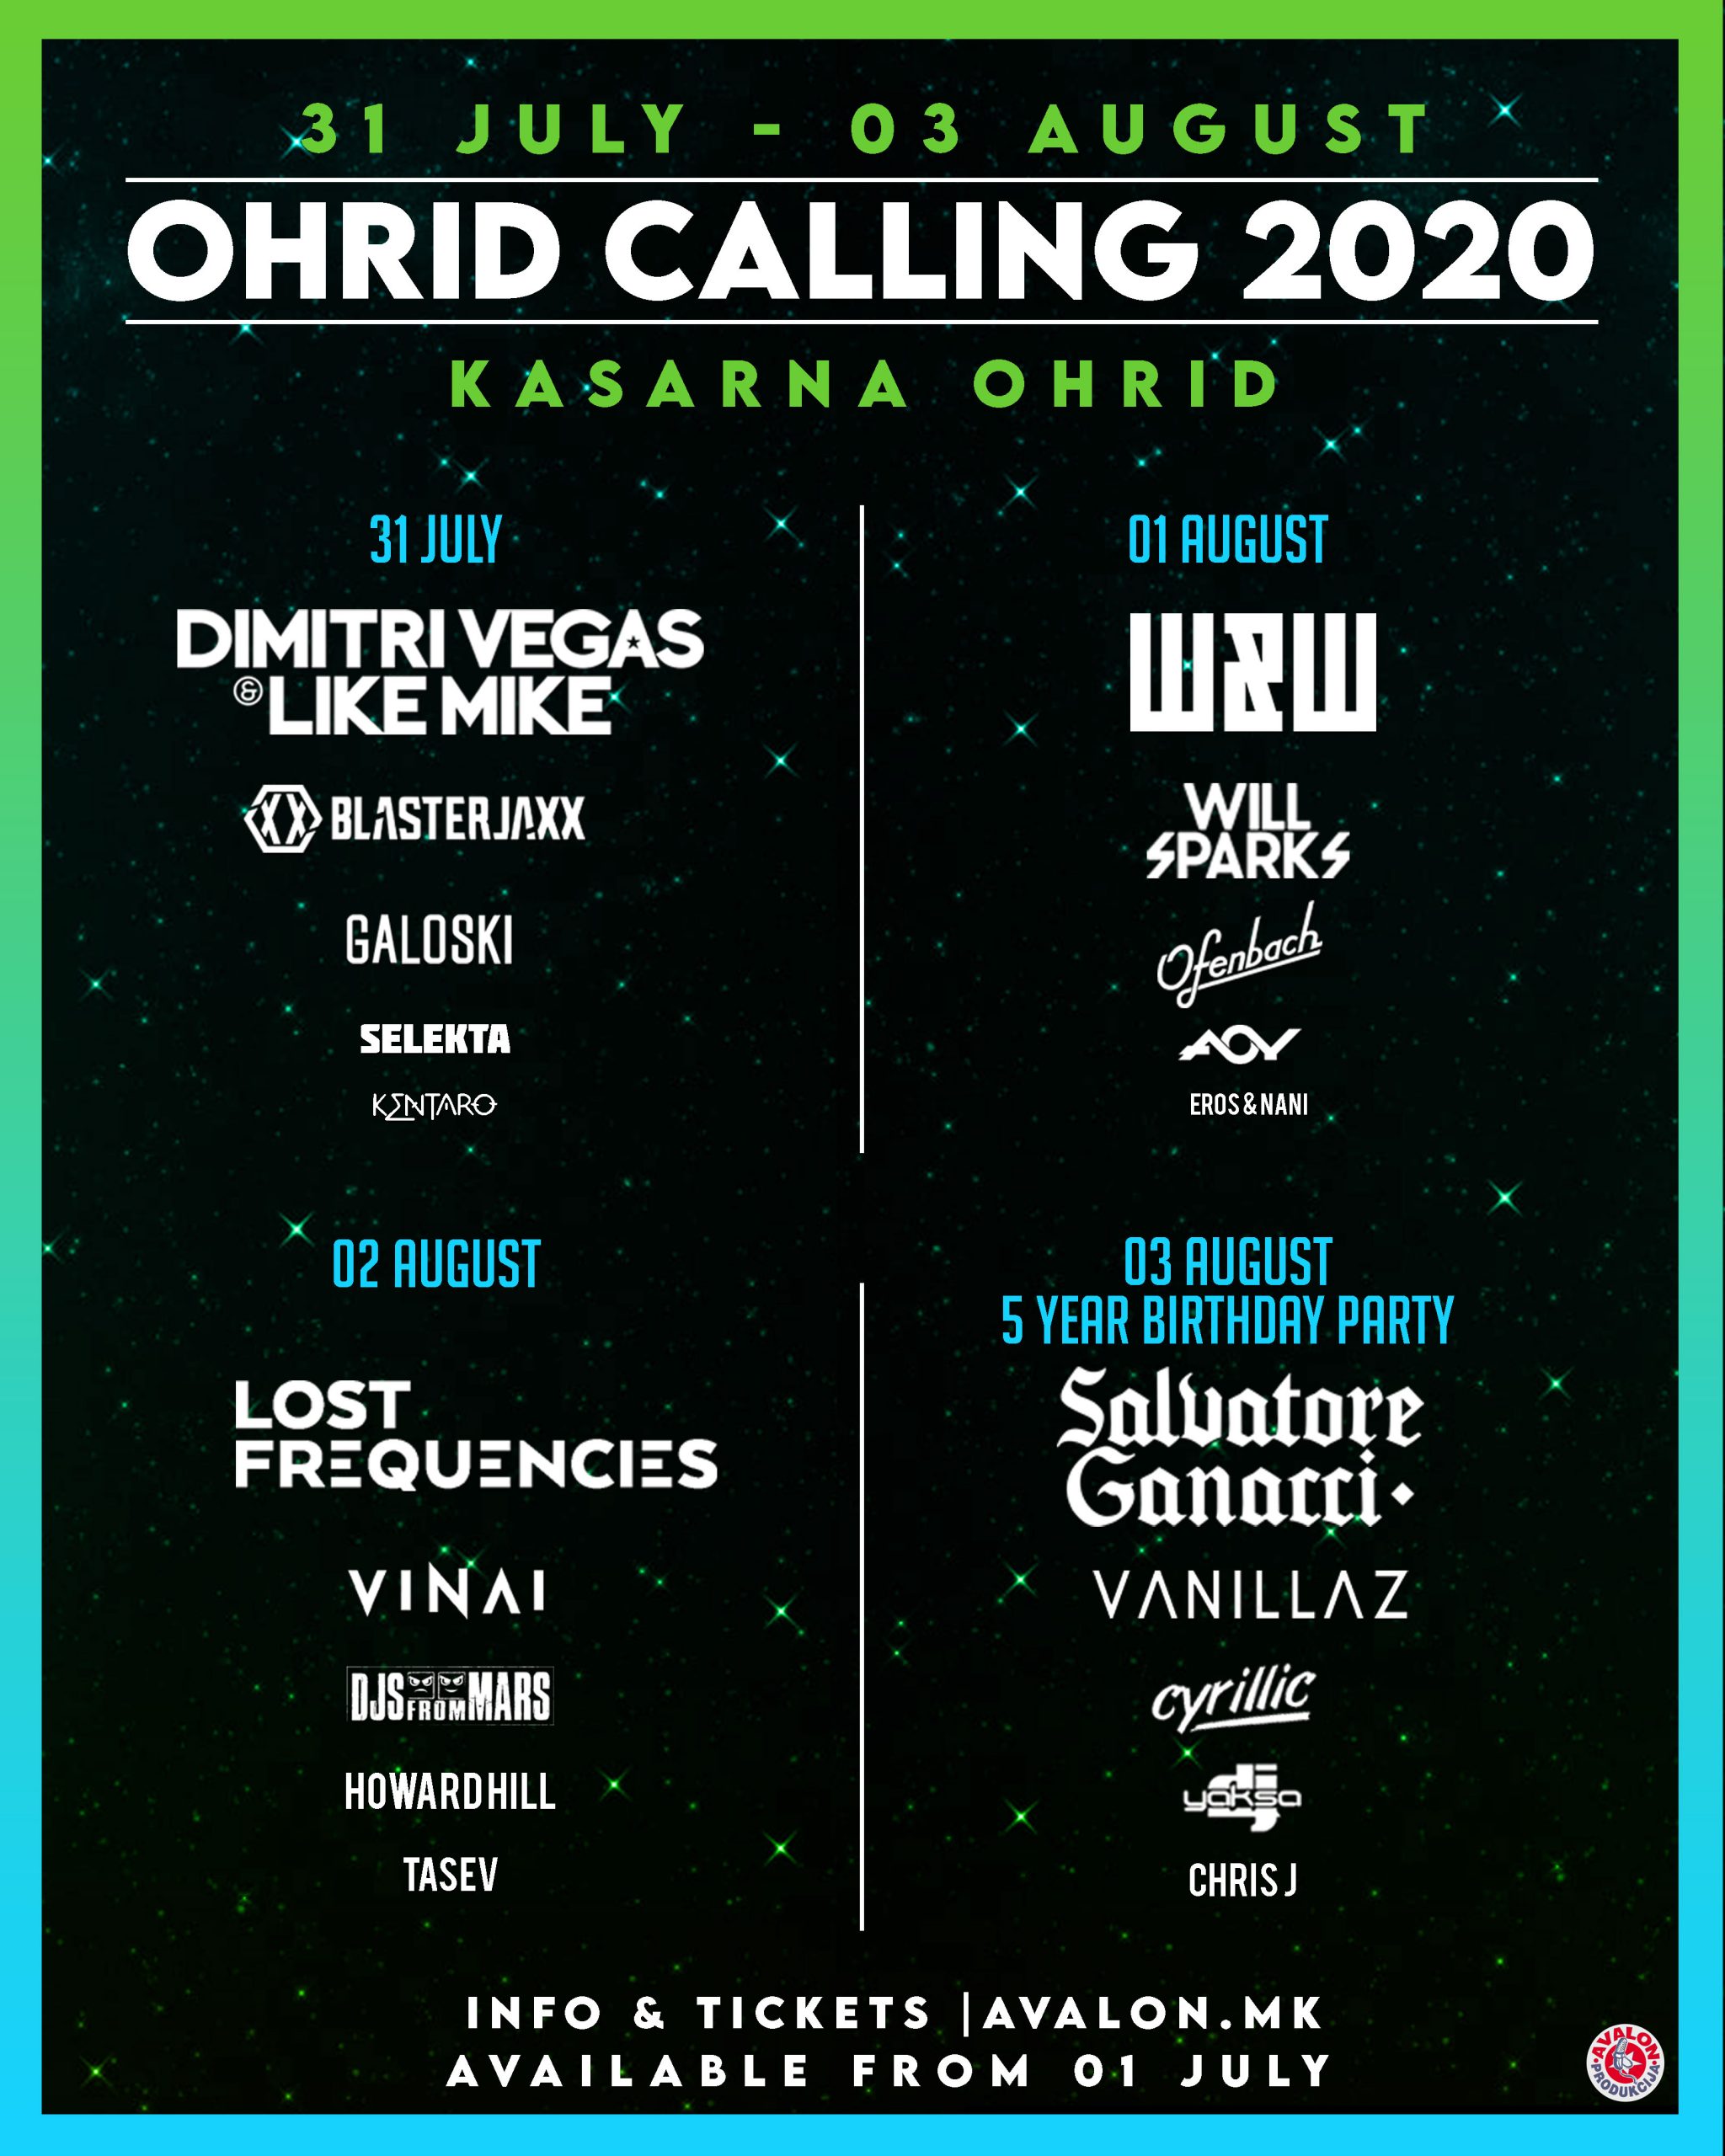 "OHRID CALLING" this summer too The world's most famous DJs are coming